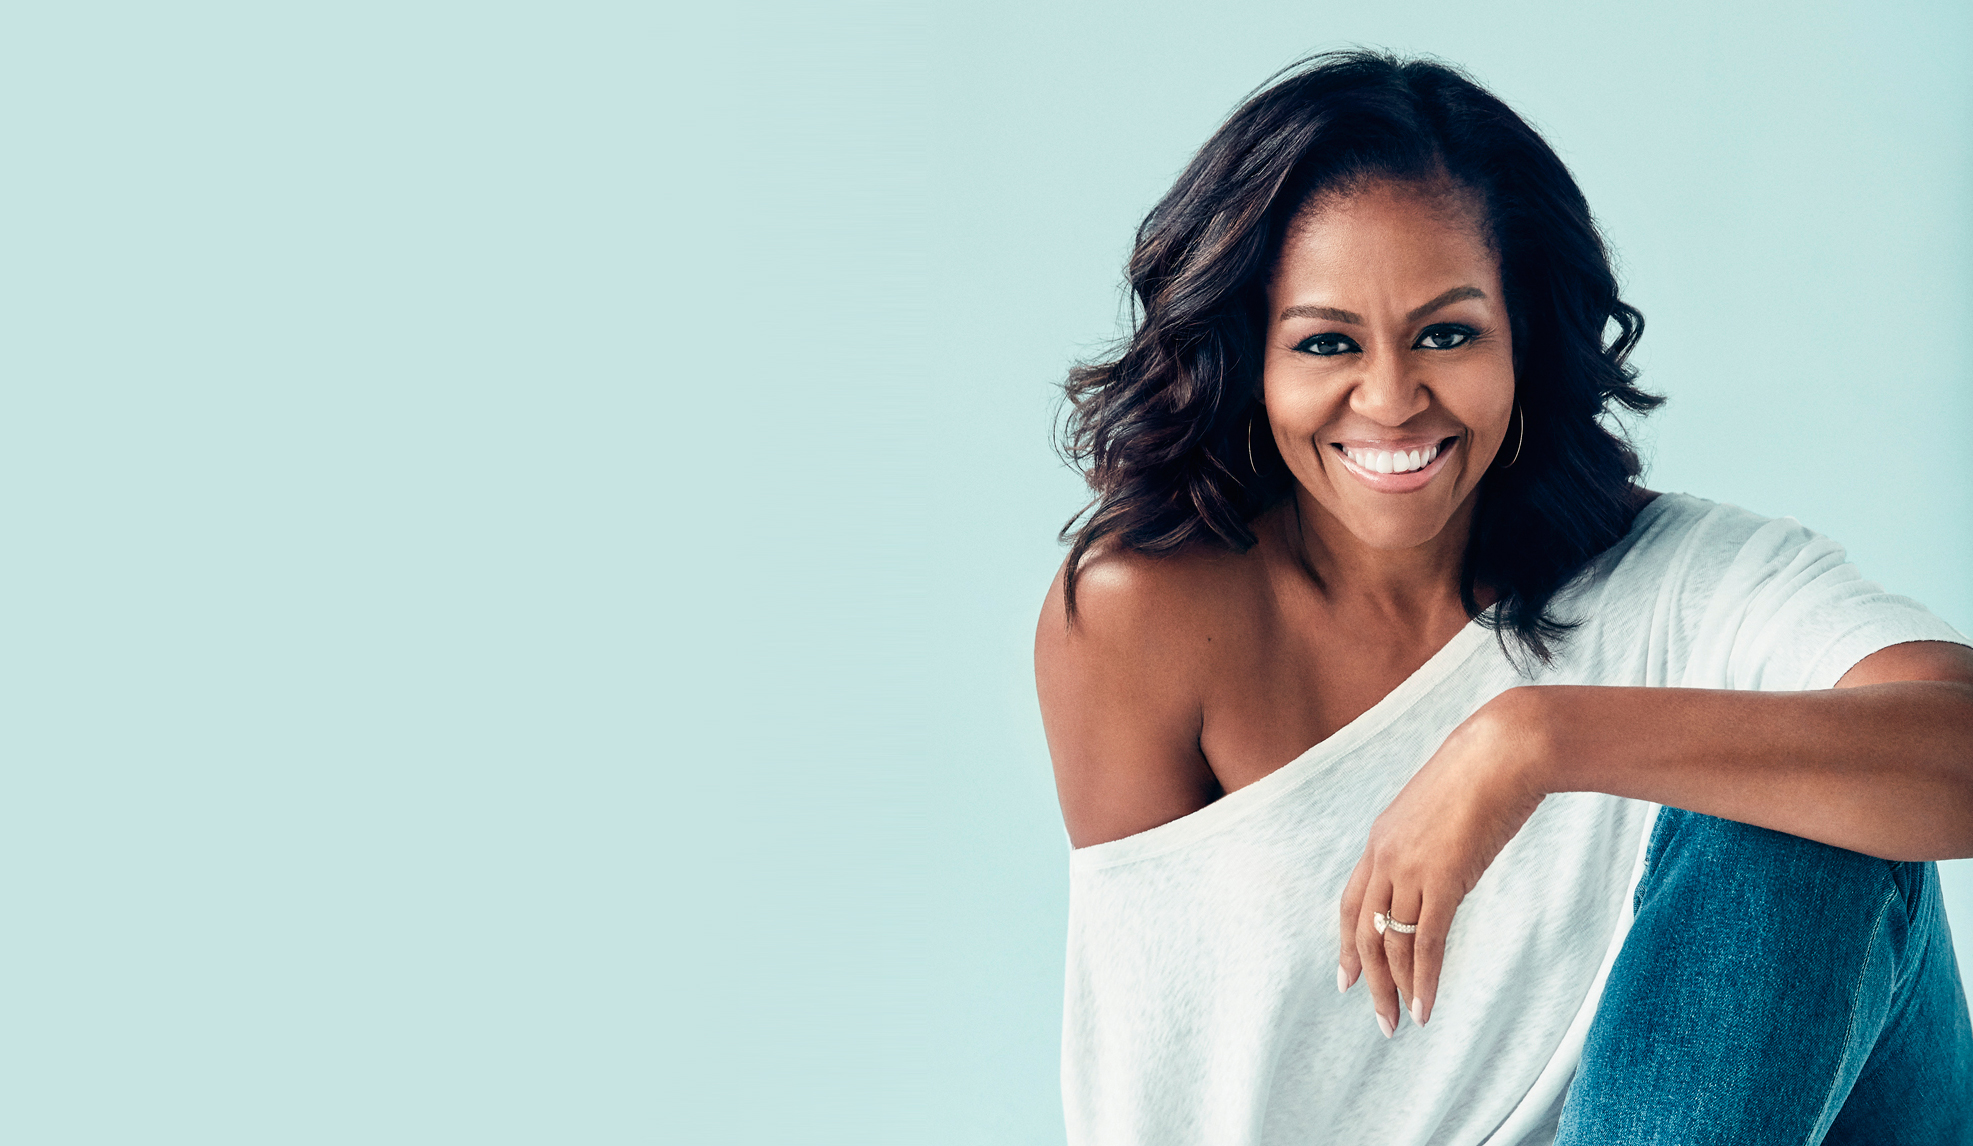 Michelle Obama at Royal Festival Hall, London